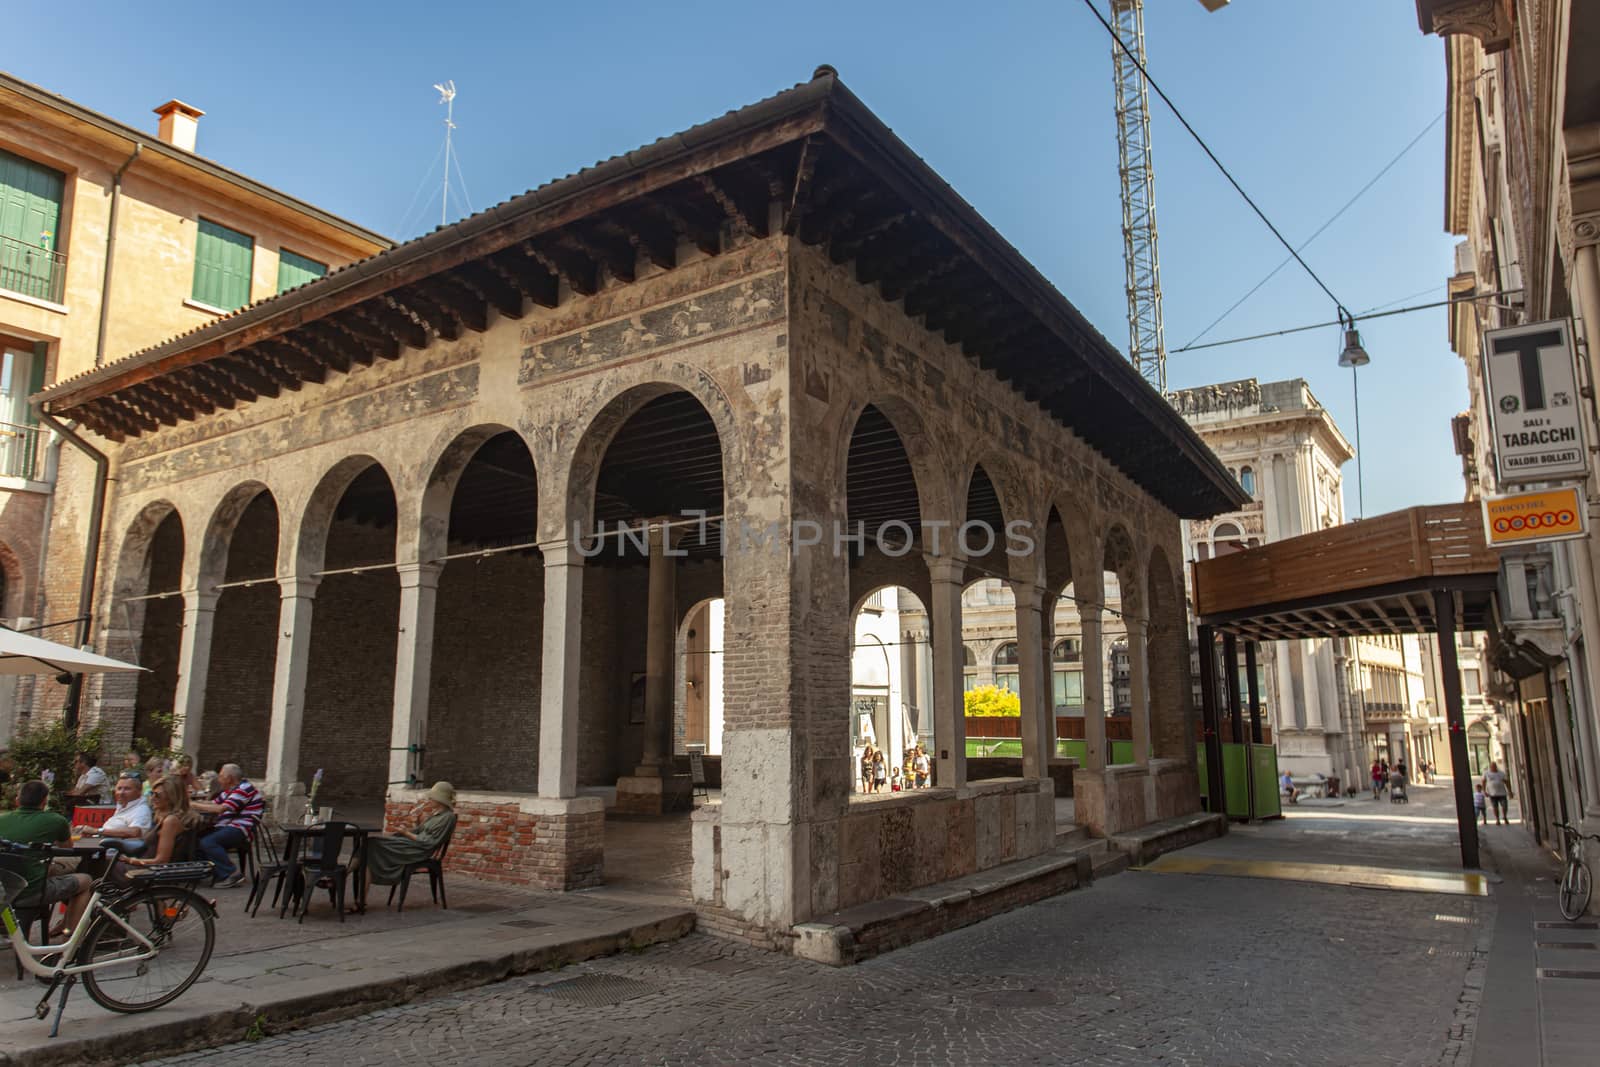 TREVISO, ITALY 13 AUGUST 2020: Loggia dei Cavalieri in Treviso, a famous building in the historical city center